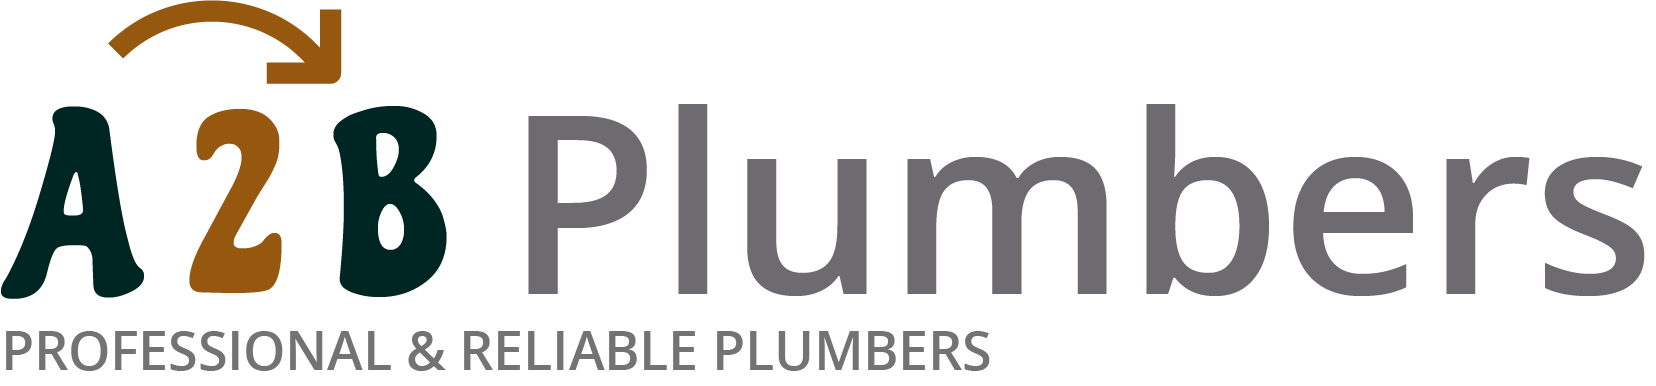 If you need a boiler installed, a radiator repaired or a leaking tap fixed, call us now - we provide services for properties in Tilehurst and the local area.